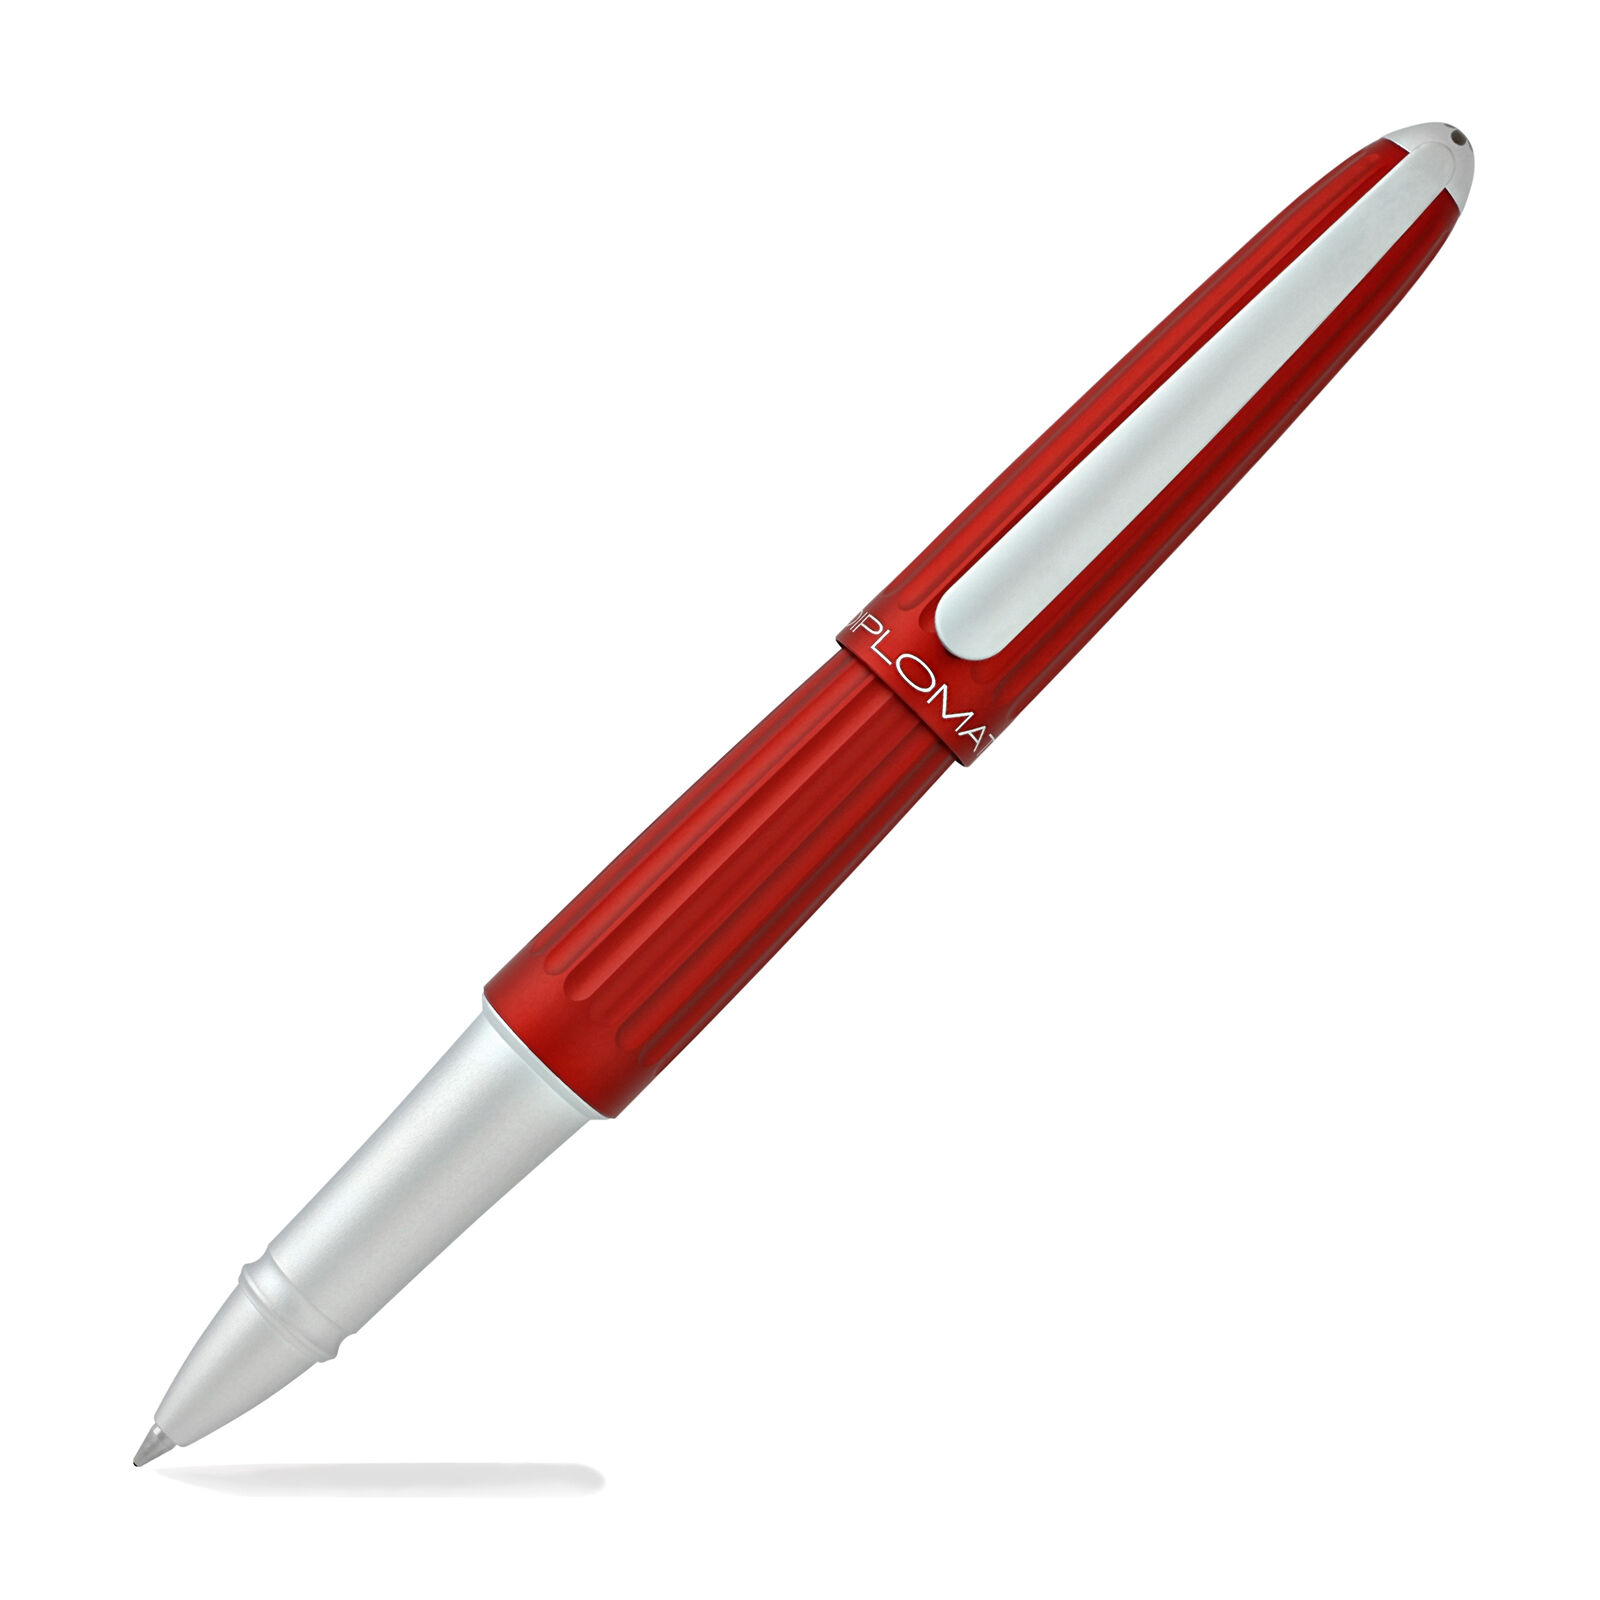 Diplomat Aero Rollerball Pen - Red - D40308030 - New in Gift Box